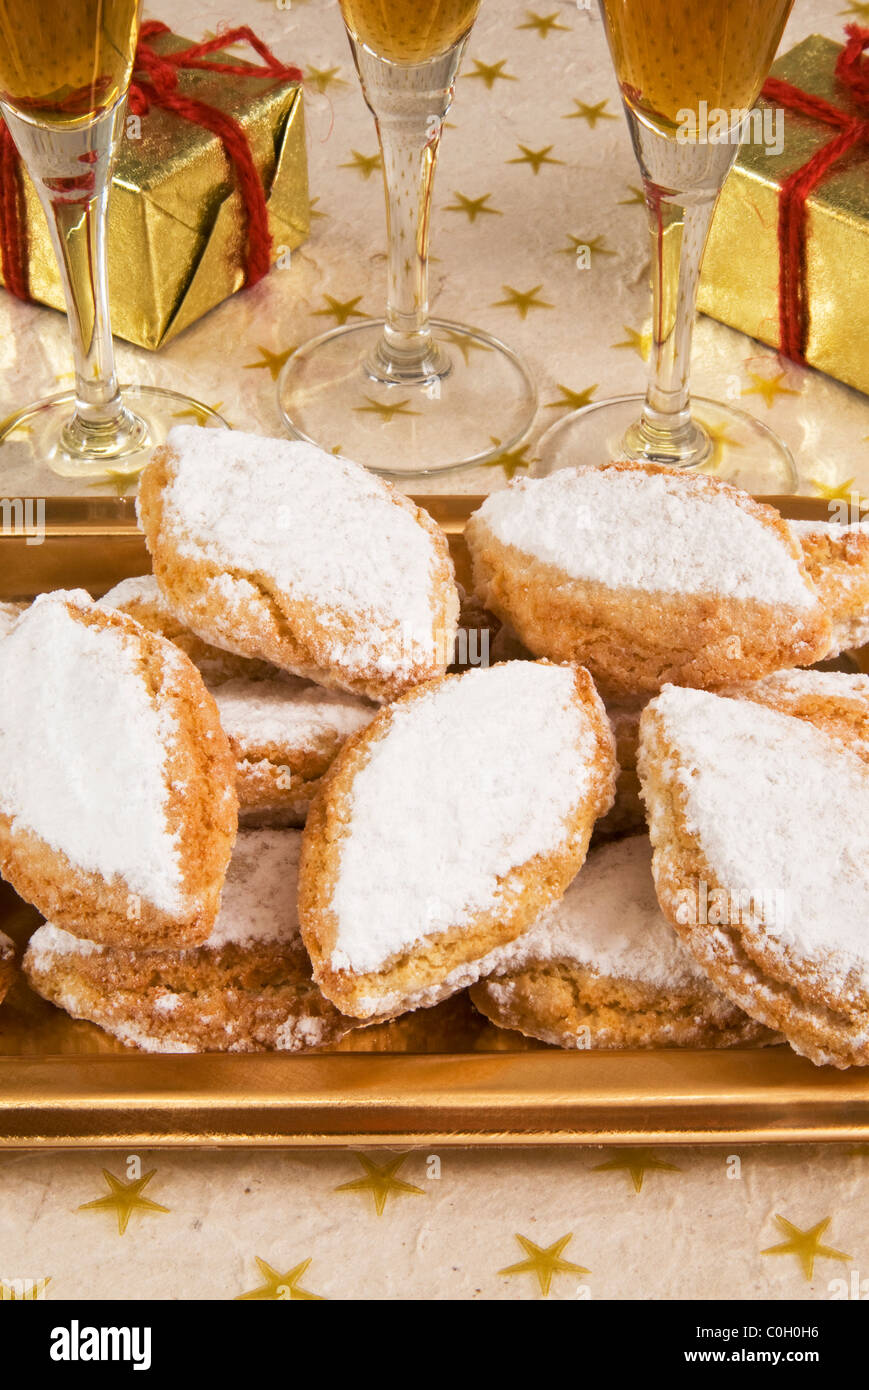 Ricciarelli of Siena, are a traditional Italian biscuit with origin in the Tuscan city of Siena, Italian gastronomy, Italy Stock Photo